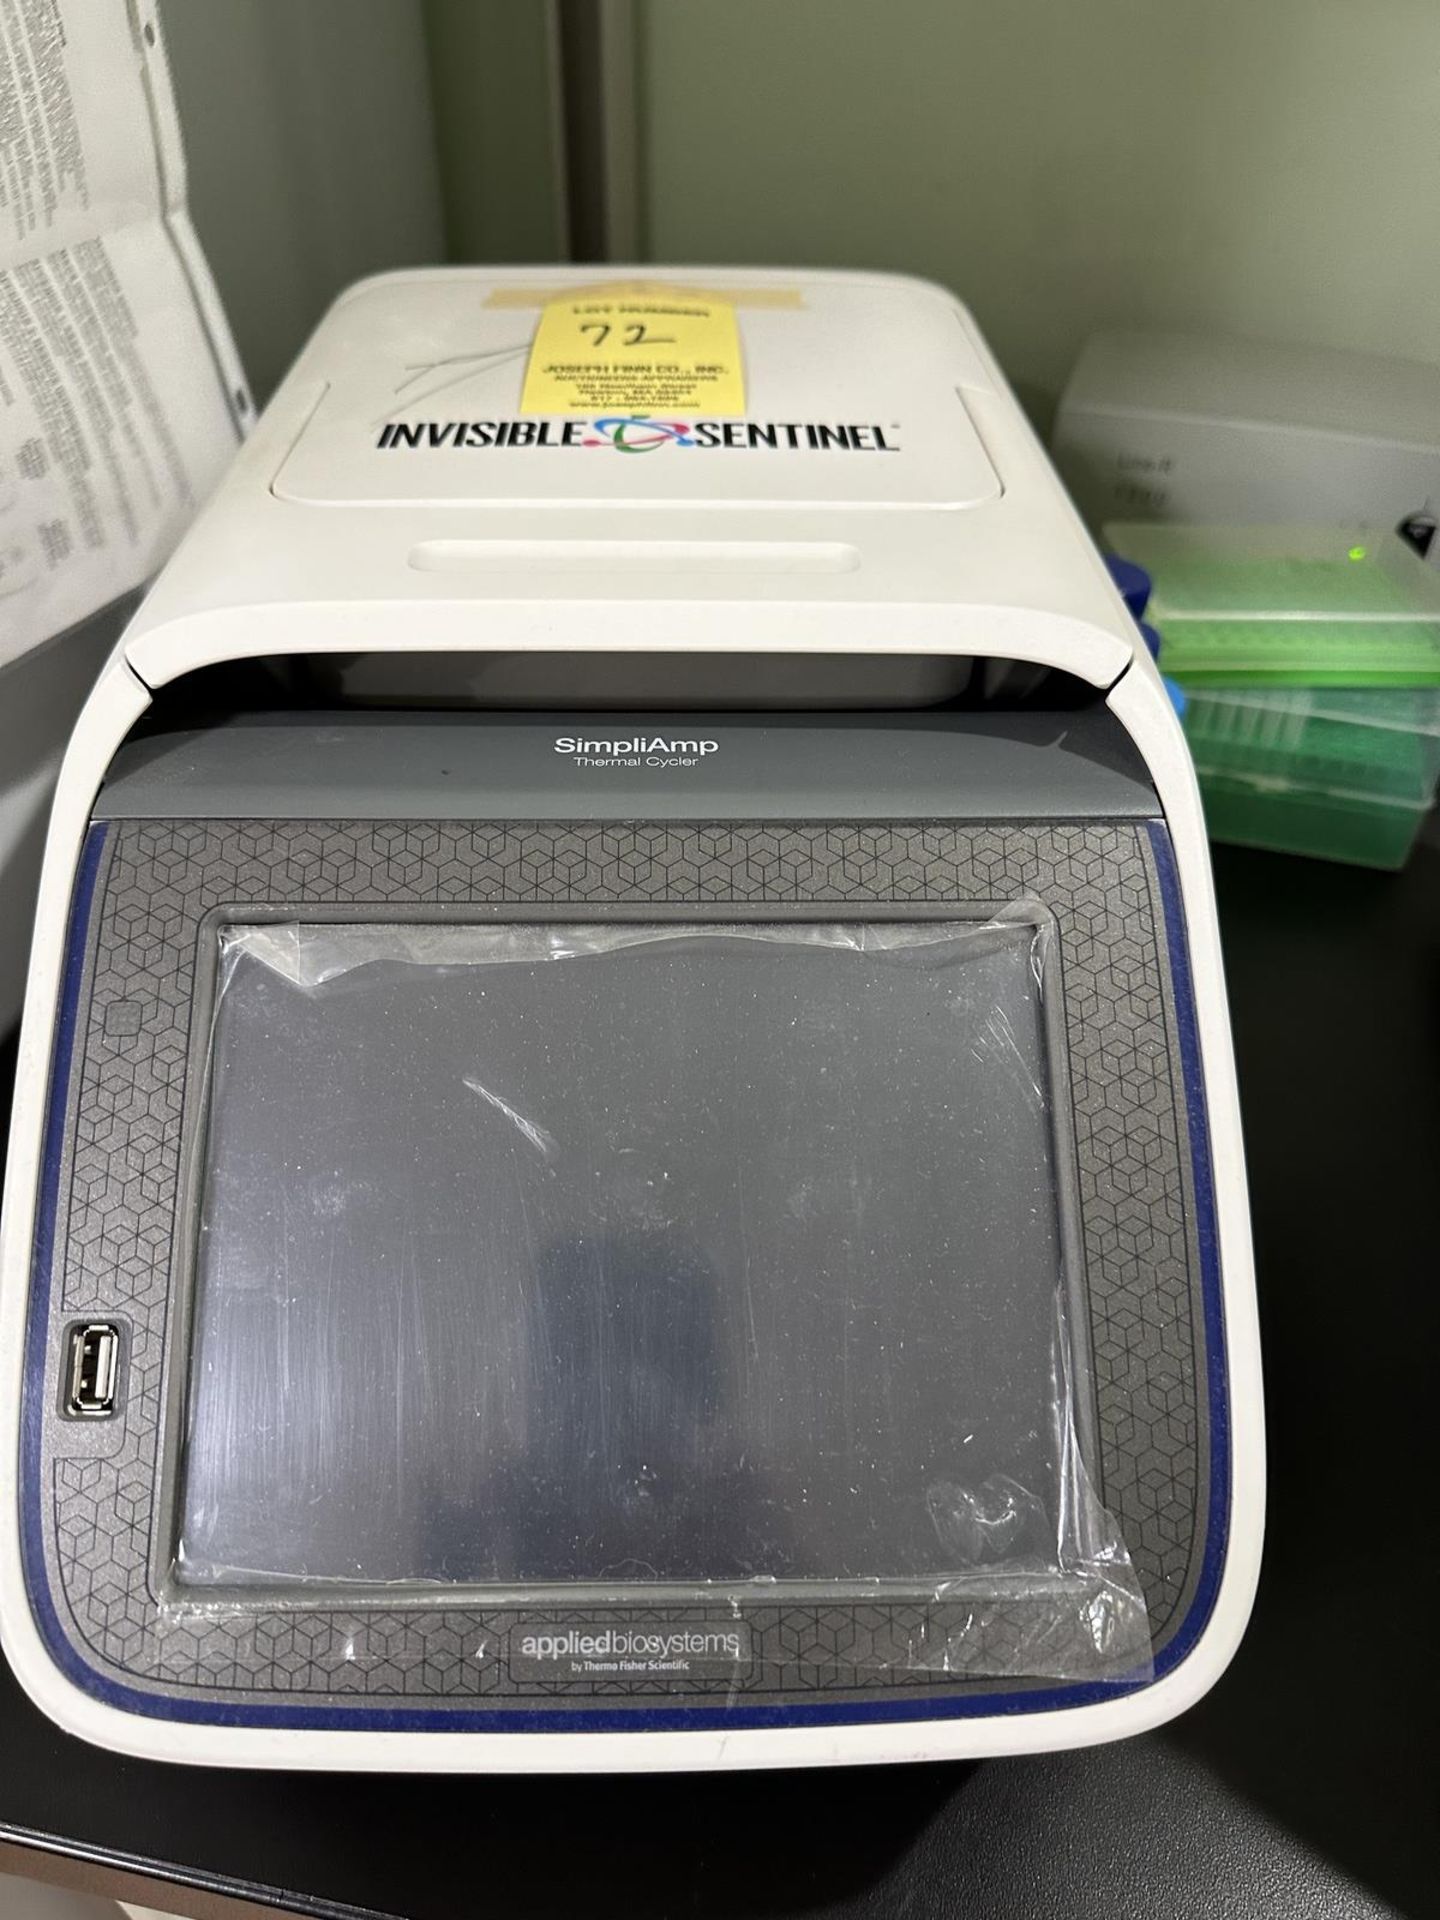 Applied Bio Sytems SimpiAmp Thermal Cycler s/n 2280119010328